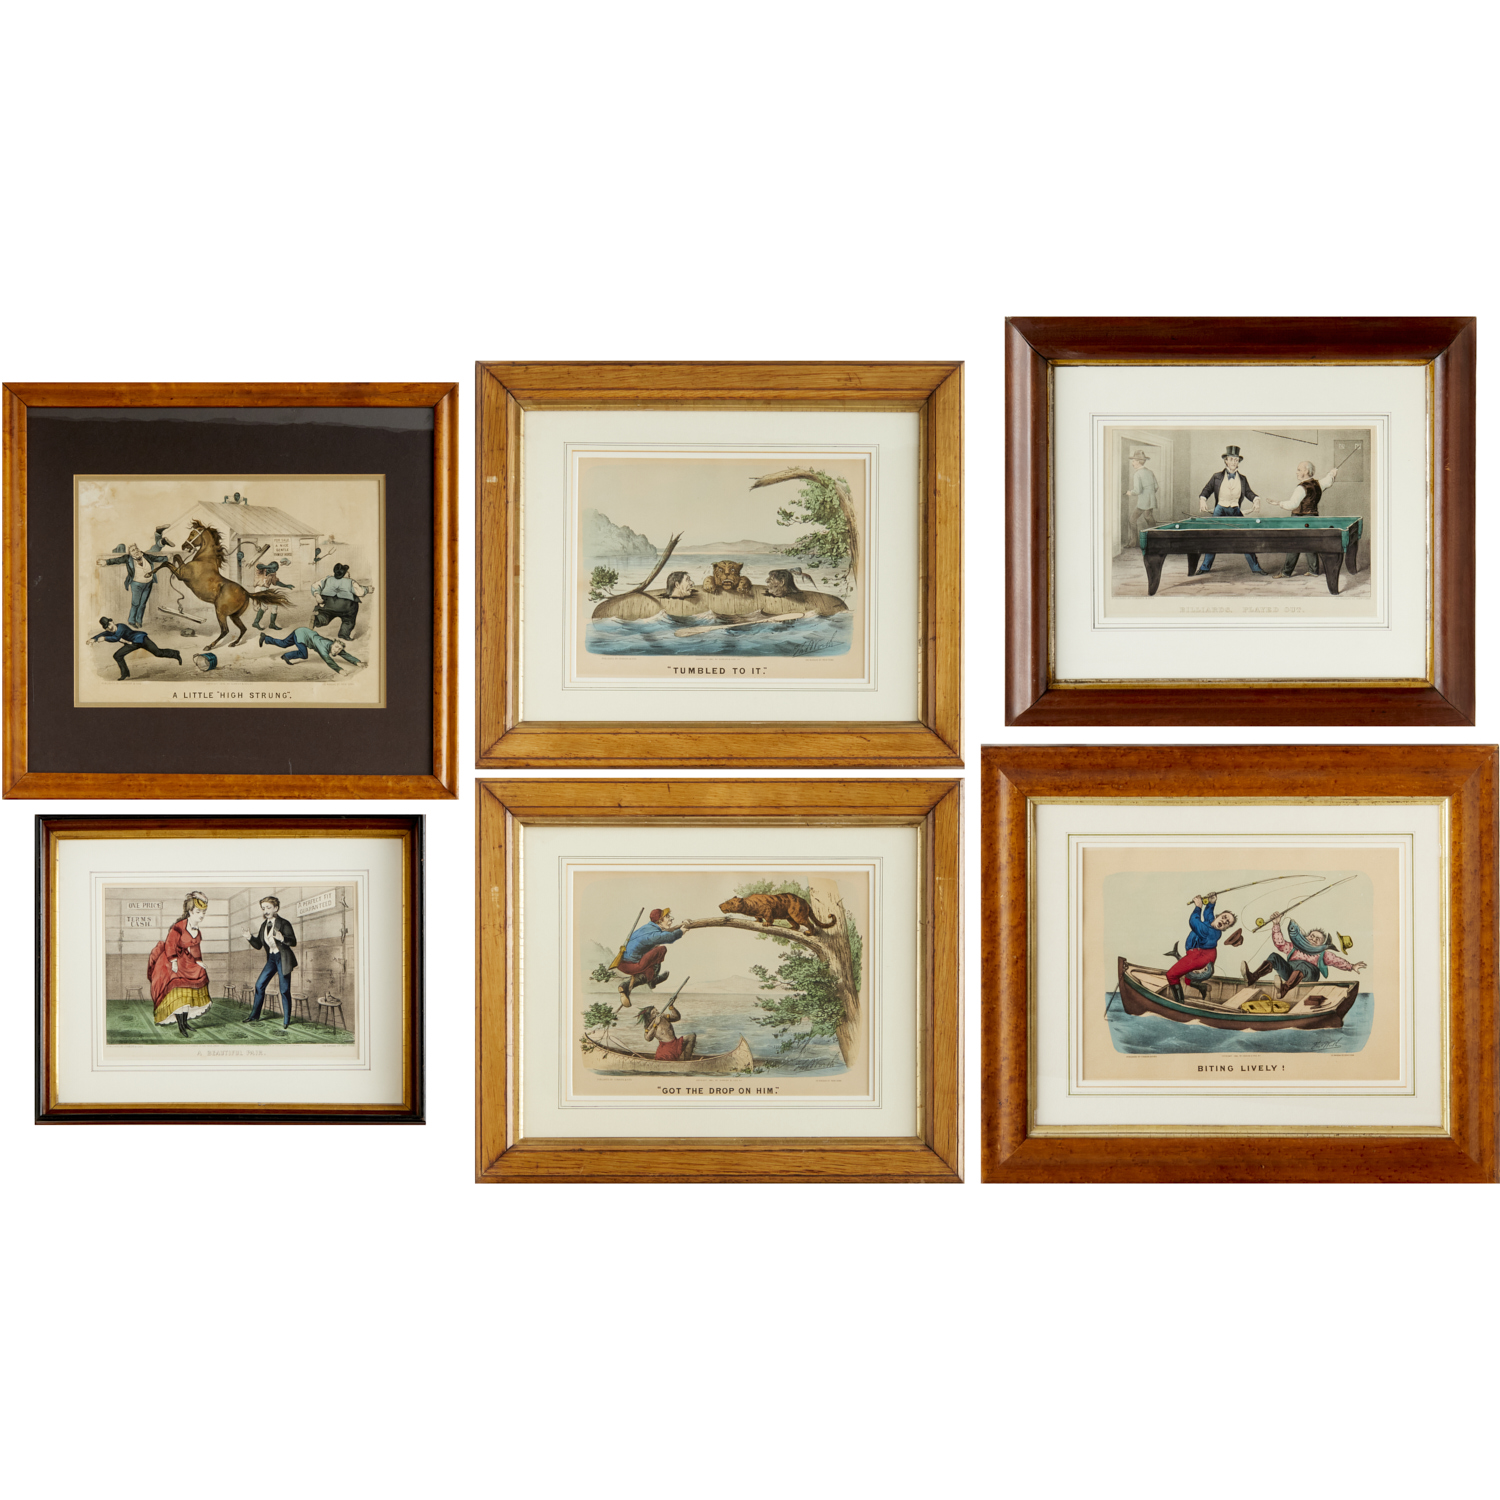  6 CURRIER IVES COLOR LITHOGRAPHS  2fc247